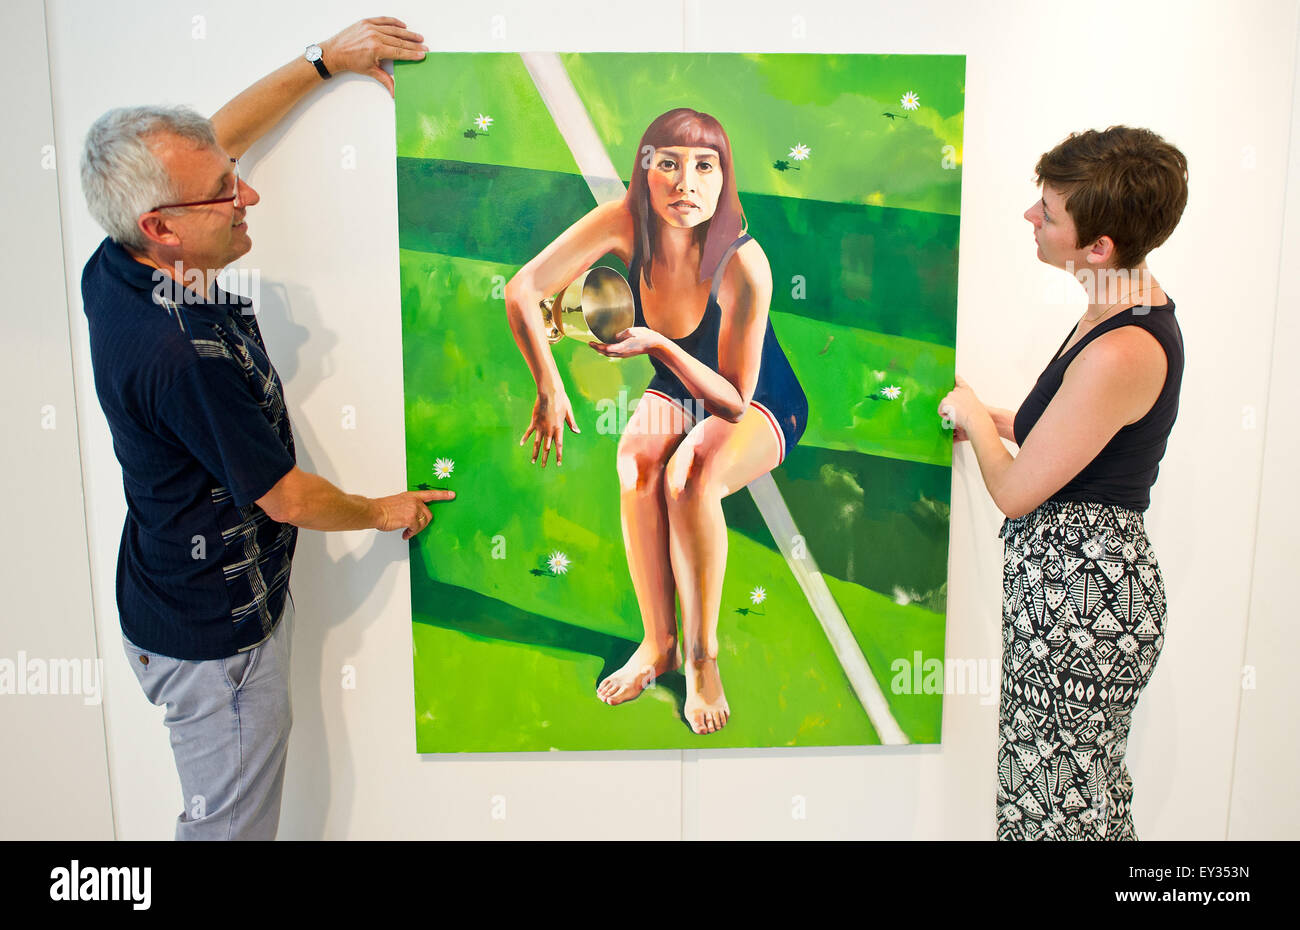 Mainz, Germany. 20th July, 2015. Oliver Schollenberger (L) and Selina Rosa Ruffing (R), organisers of the art exhibition 'Freistil' (lit. free style) mount an artwork entitled 'Having Won' by Ellen Akimoto to a wall in the lobby of the Landesbausparkasse Rheinland-Pfalz (lit. Rhineland-Palatinate state building association) in Mainz, Germany, 20 July 2015. Photo: Foto: Christoph Schmidt/dpa/Alamy Live News Stock Photo